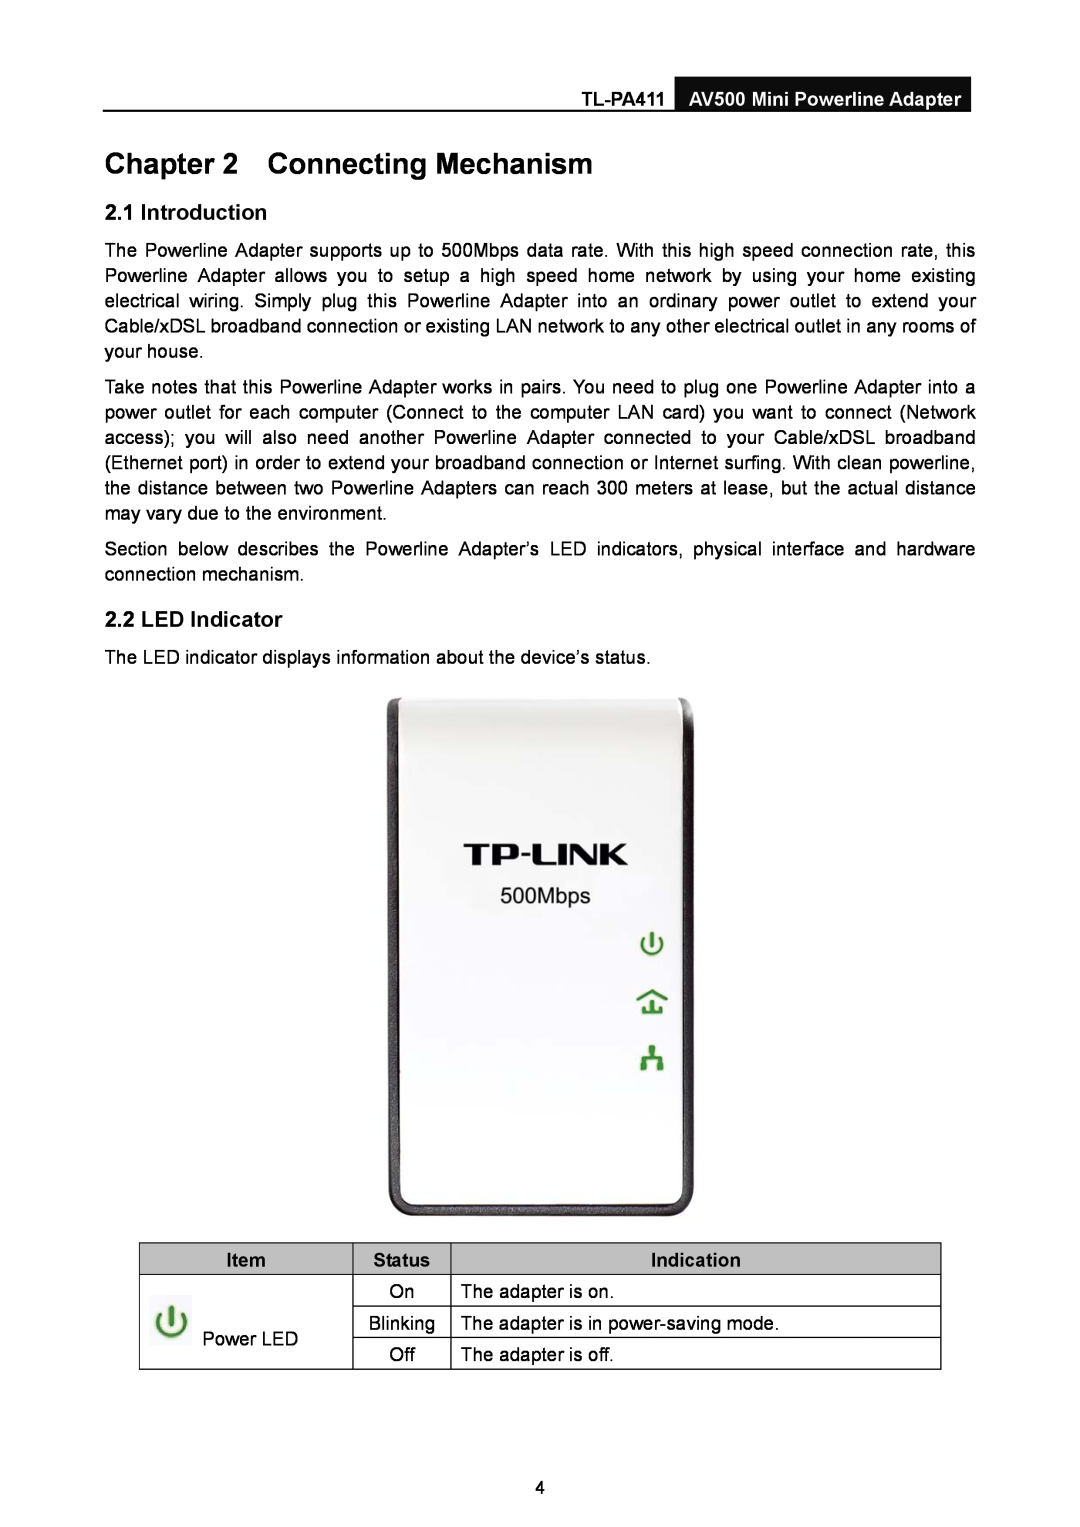 TP-Link Connecting Mechanism, Introduction, LED Indicator, TL-PA411 AV500 Mini Powerline Adapter, Status, Indication 